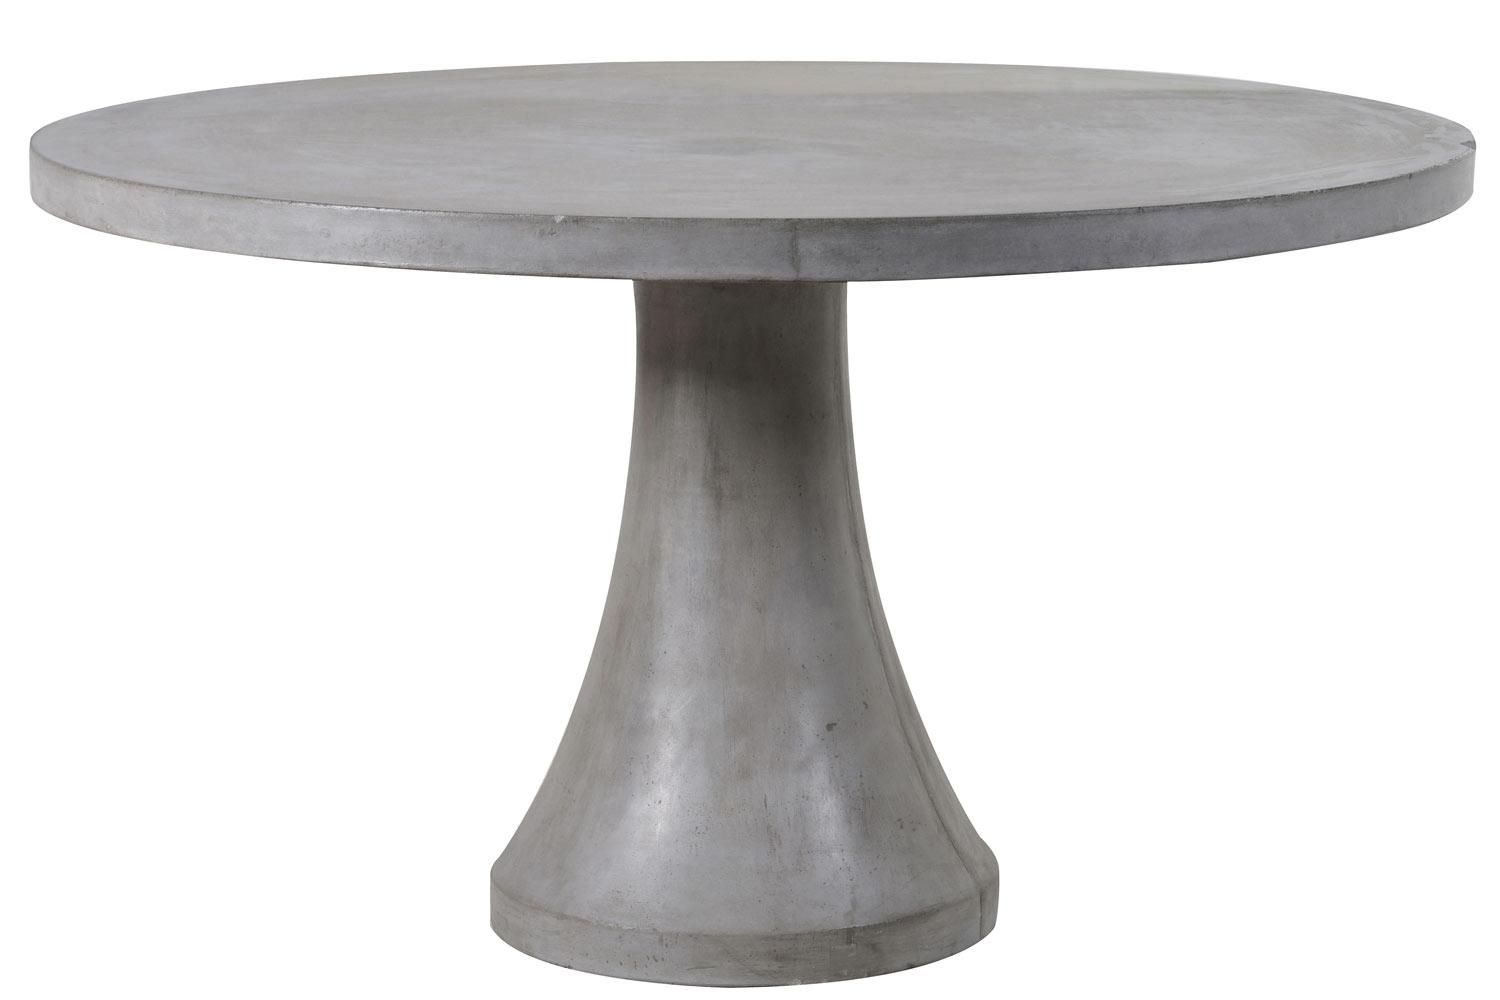 Best Dining Tables: The Best Stylish Dining Room Tables 2019 In Most Popular Aztec Round Pedestal Dining Tables (View 5 of 25)